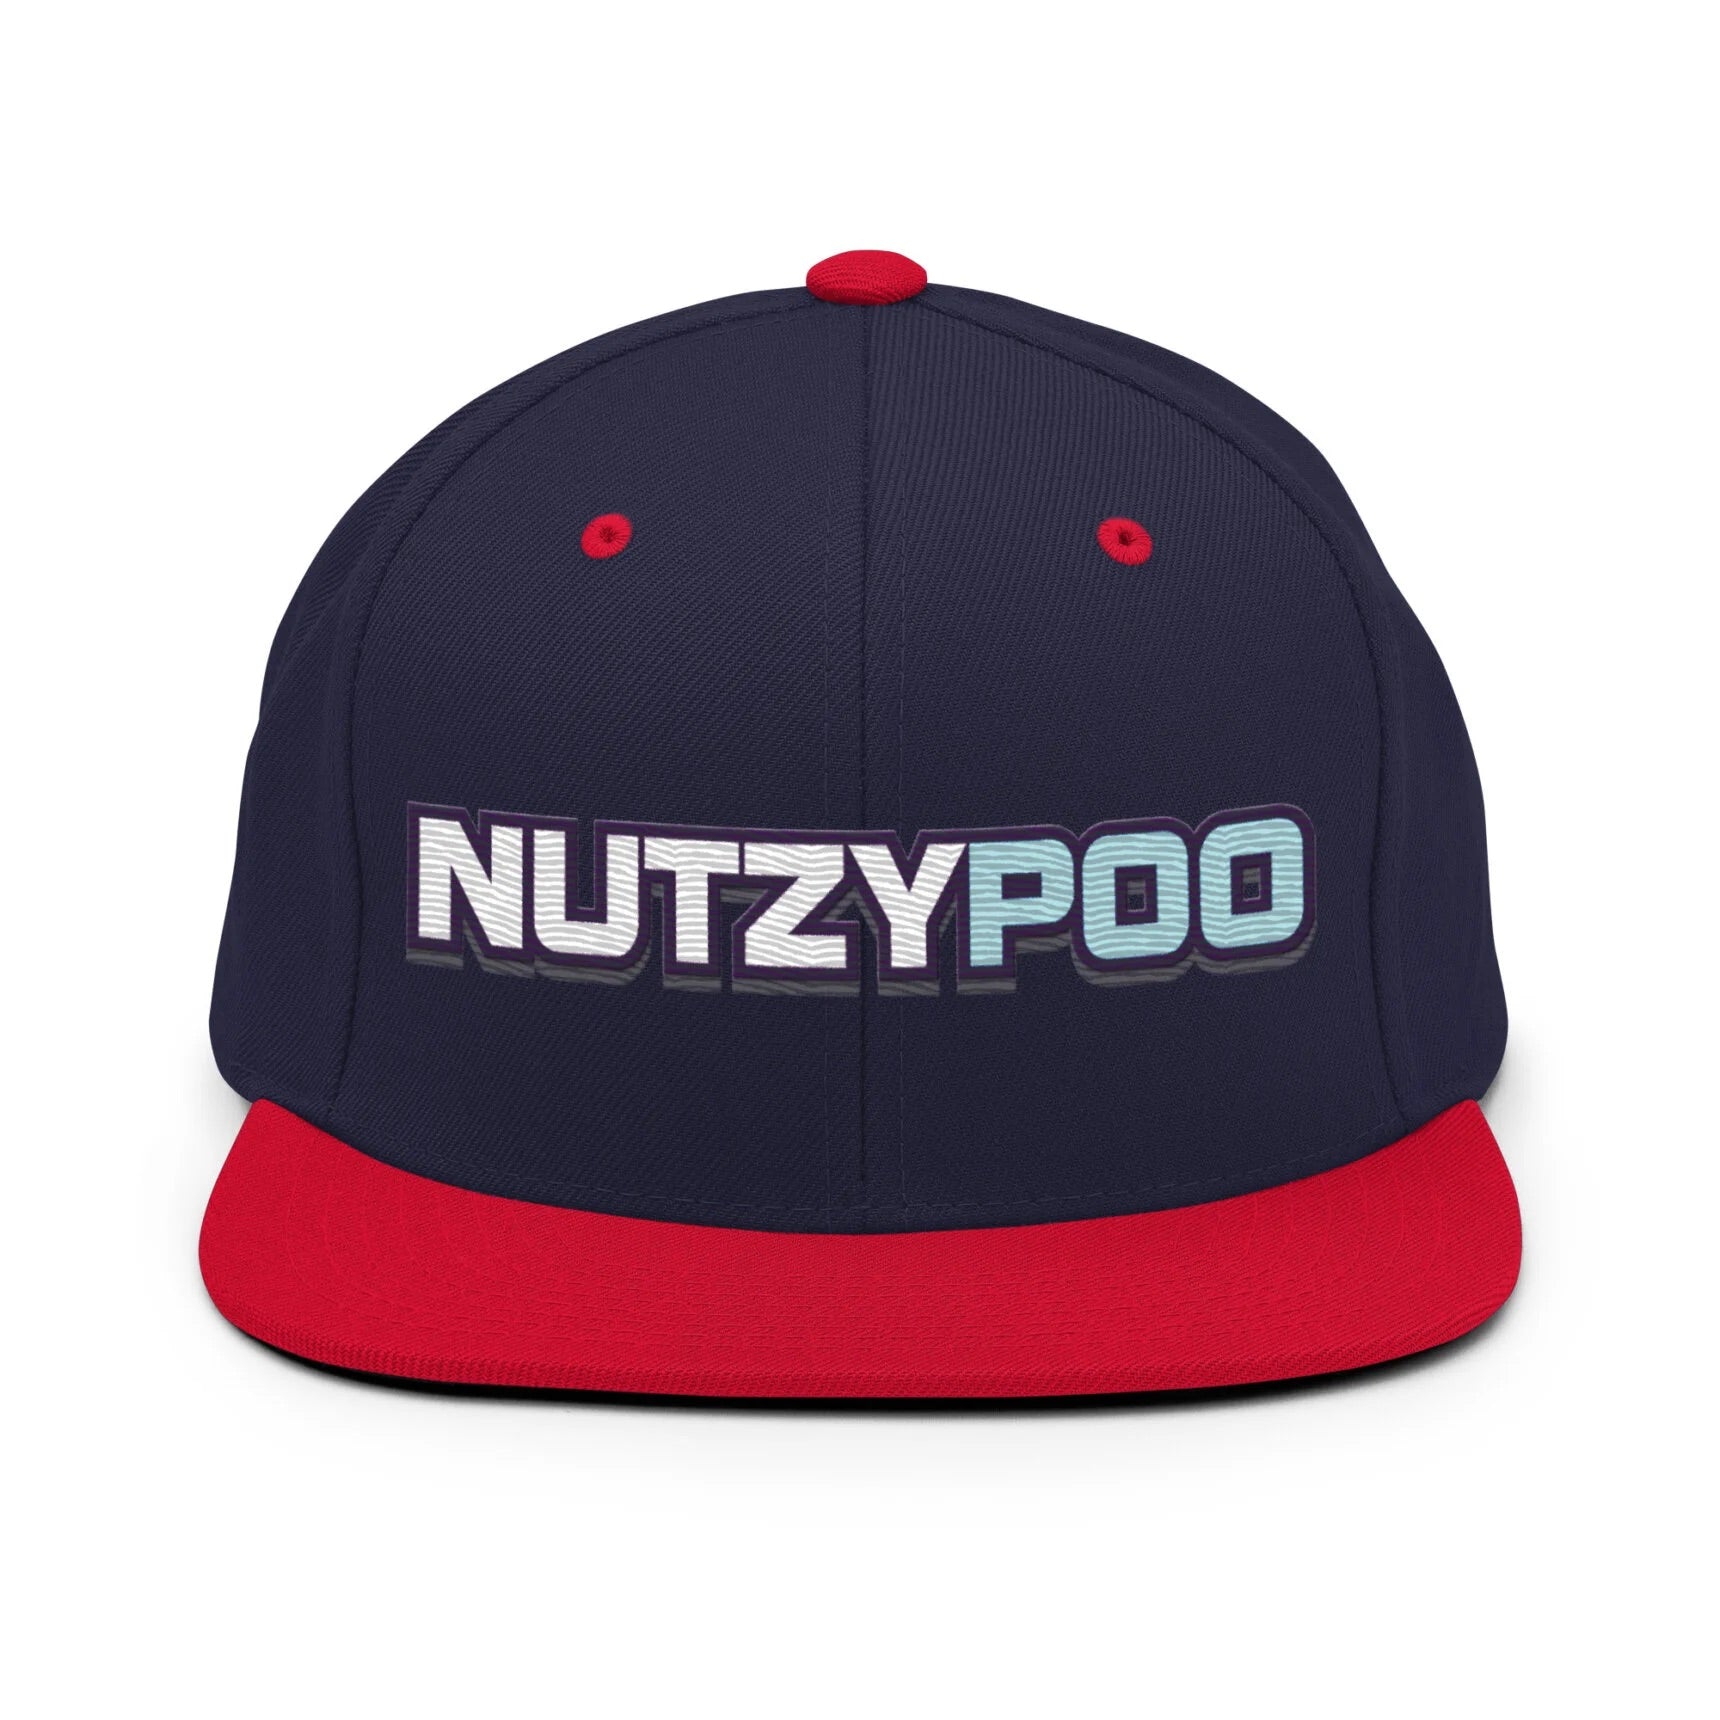 NutzyPoo ShowZone hat in navy blue with red brim and accents